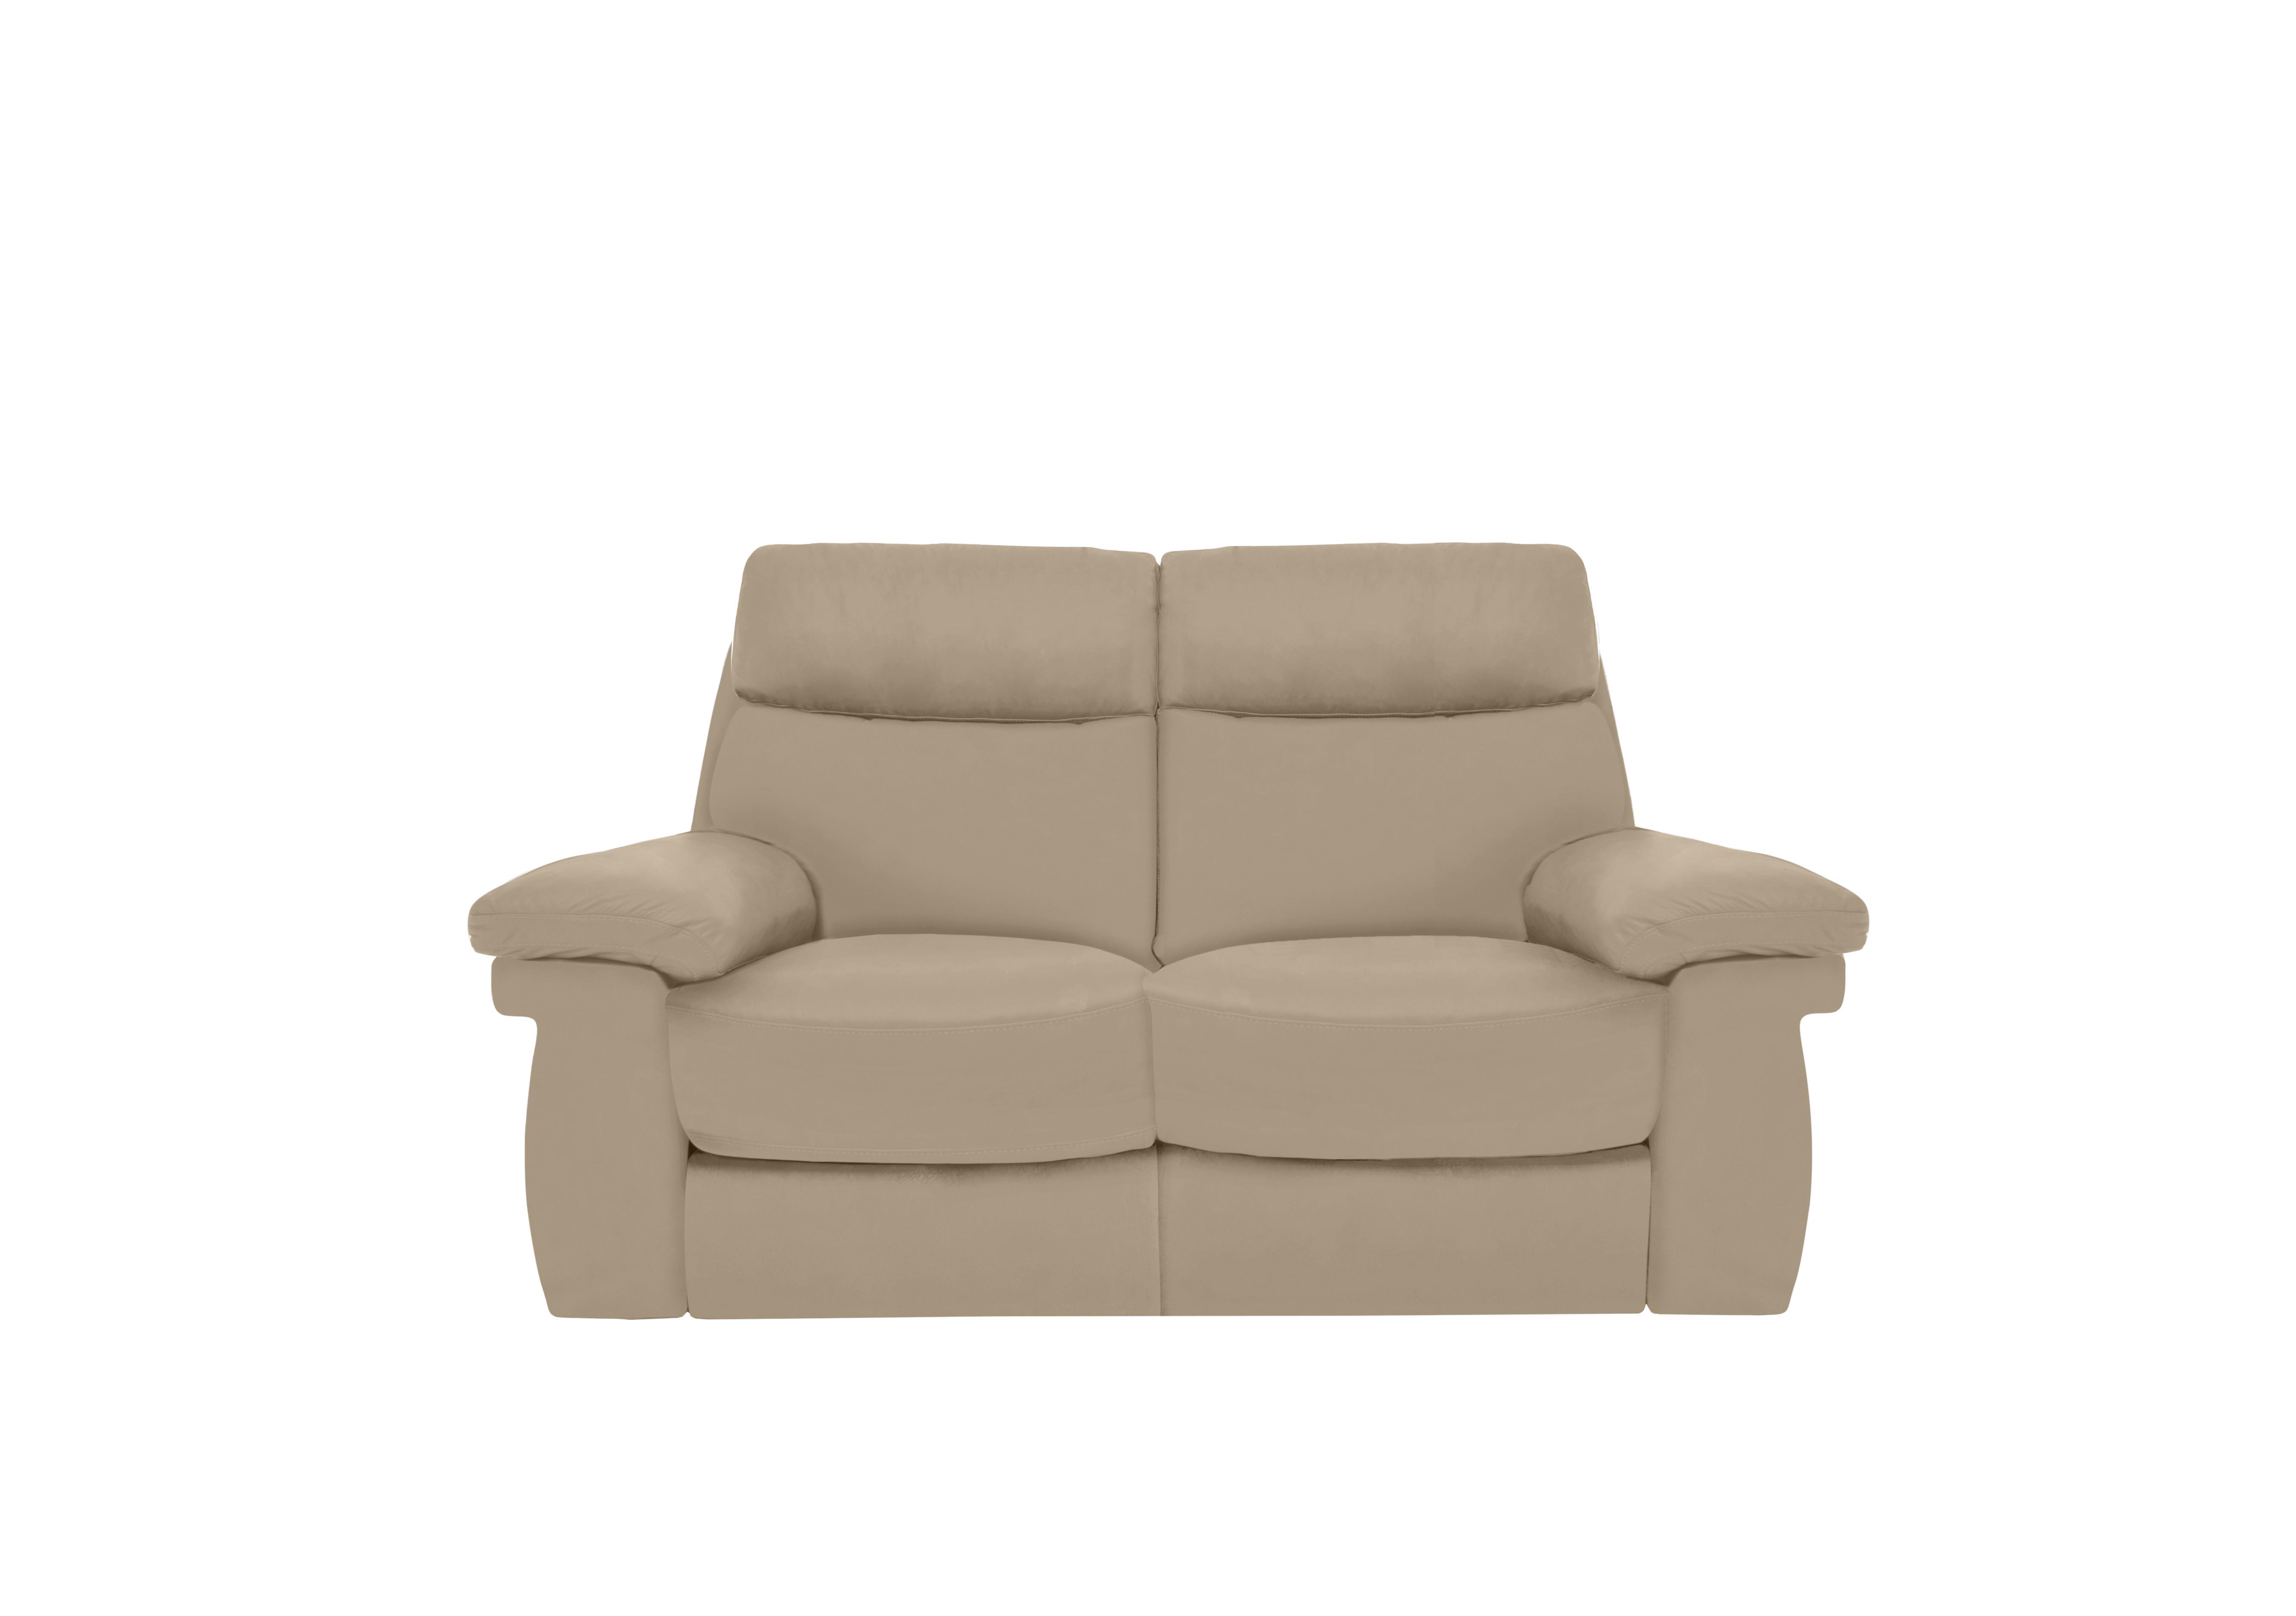 Serene 2 Seater Leather Power Recliner Sofa with Power Headrests in Bx-039c Pebble on Furniture Village